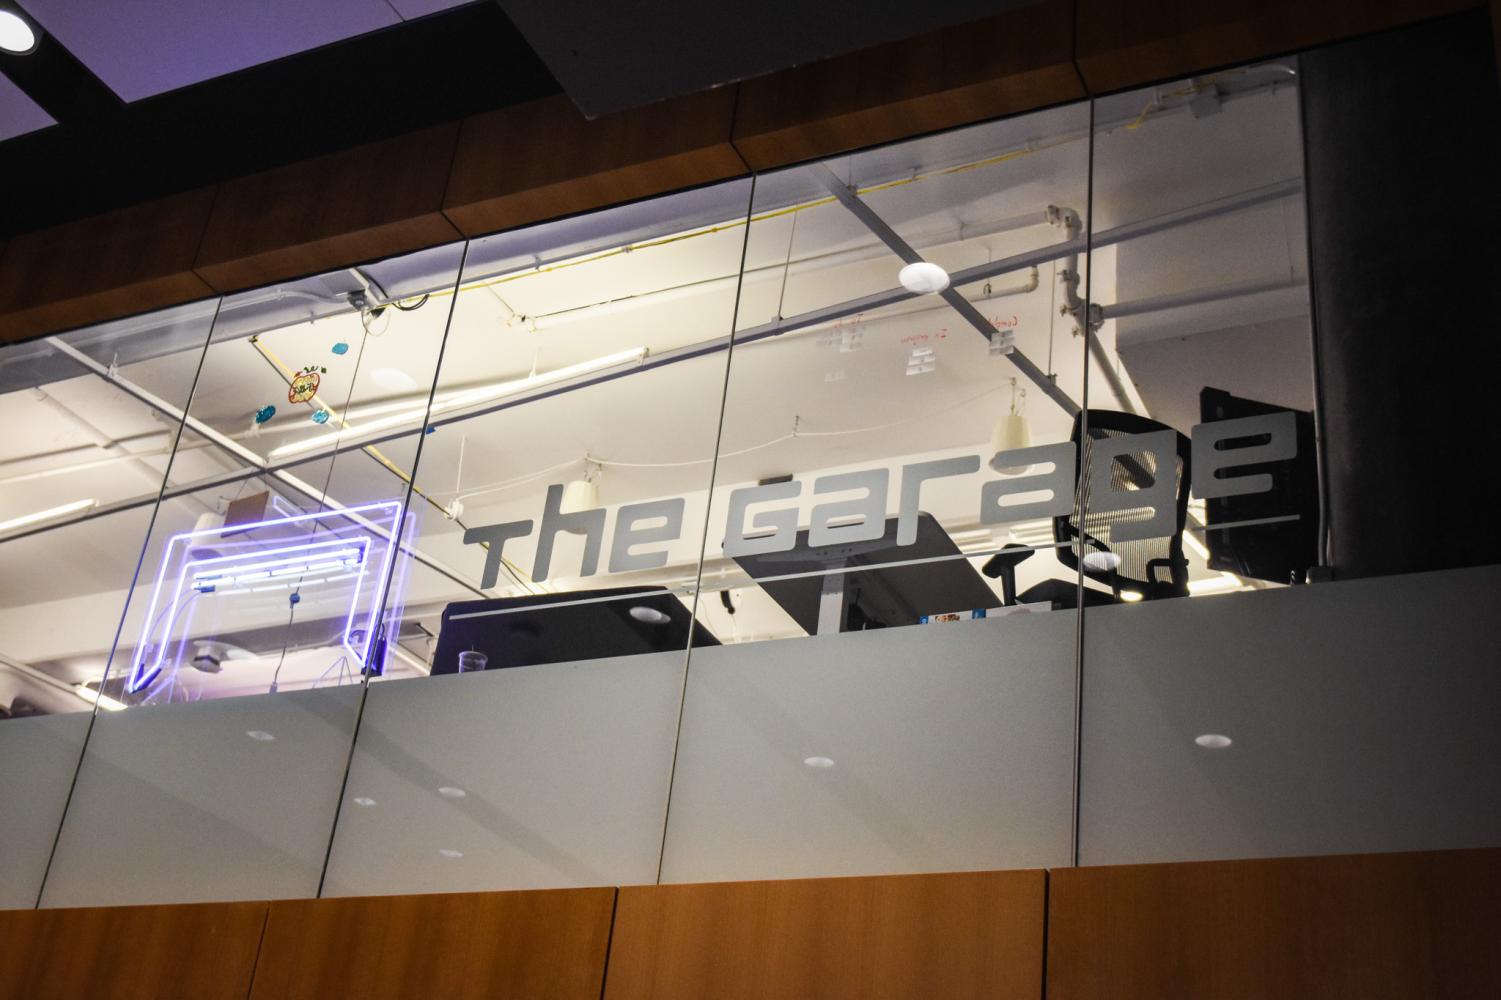 A purple LED-light logo next to the words “The Garage” written in silver on glass panels